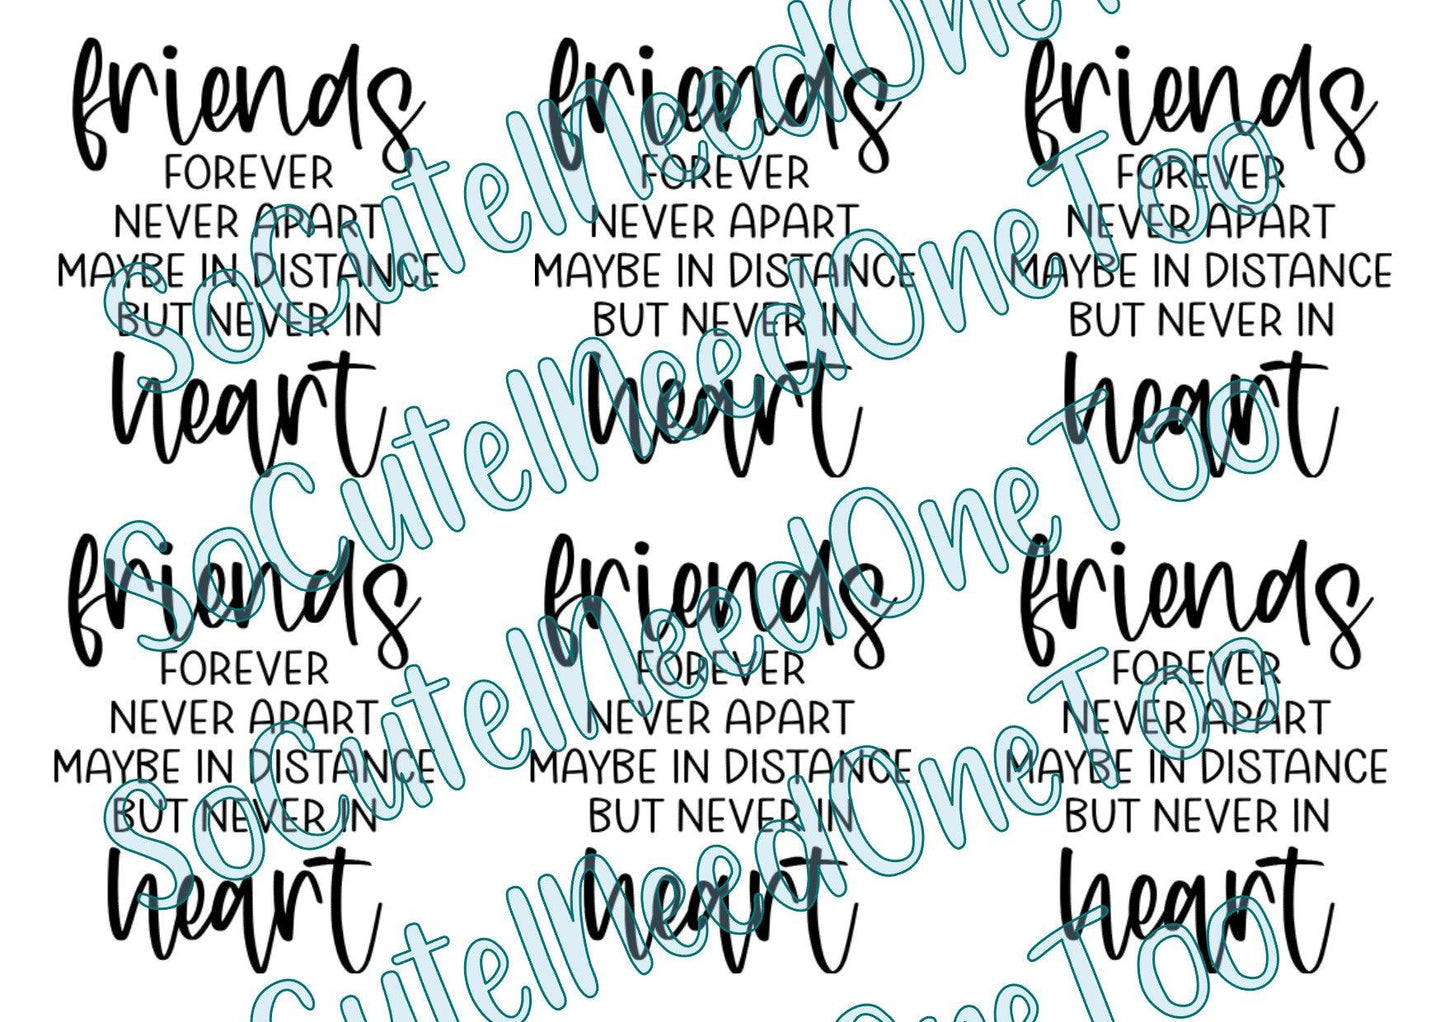 Friends Forever Never Apart on Clear/White Waterslide Paper Ready To Use - SoCuteINeedOneToo